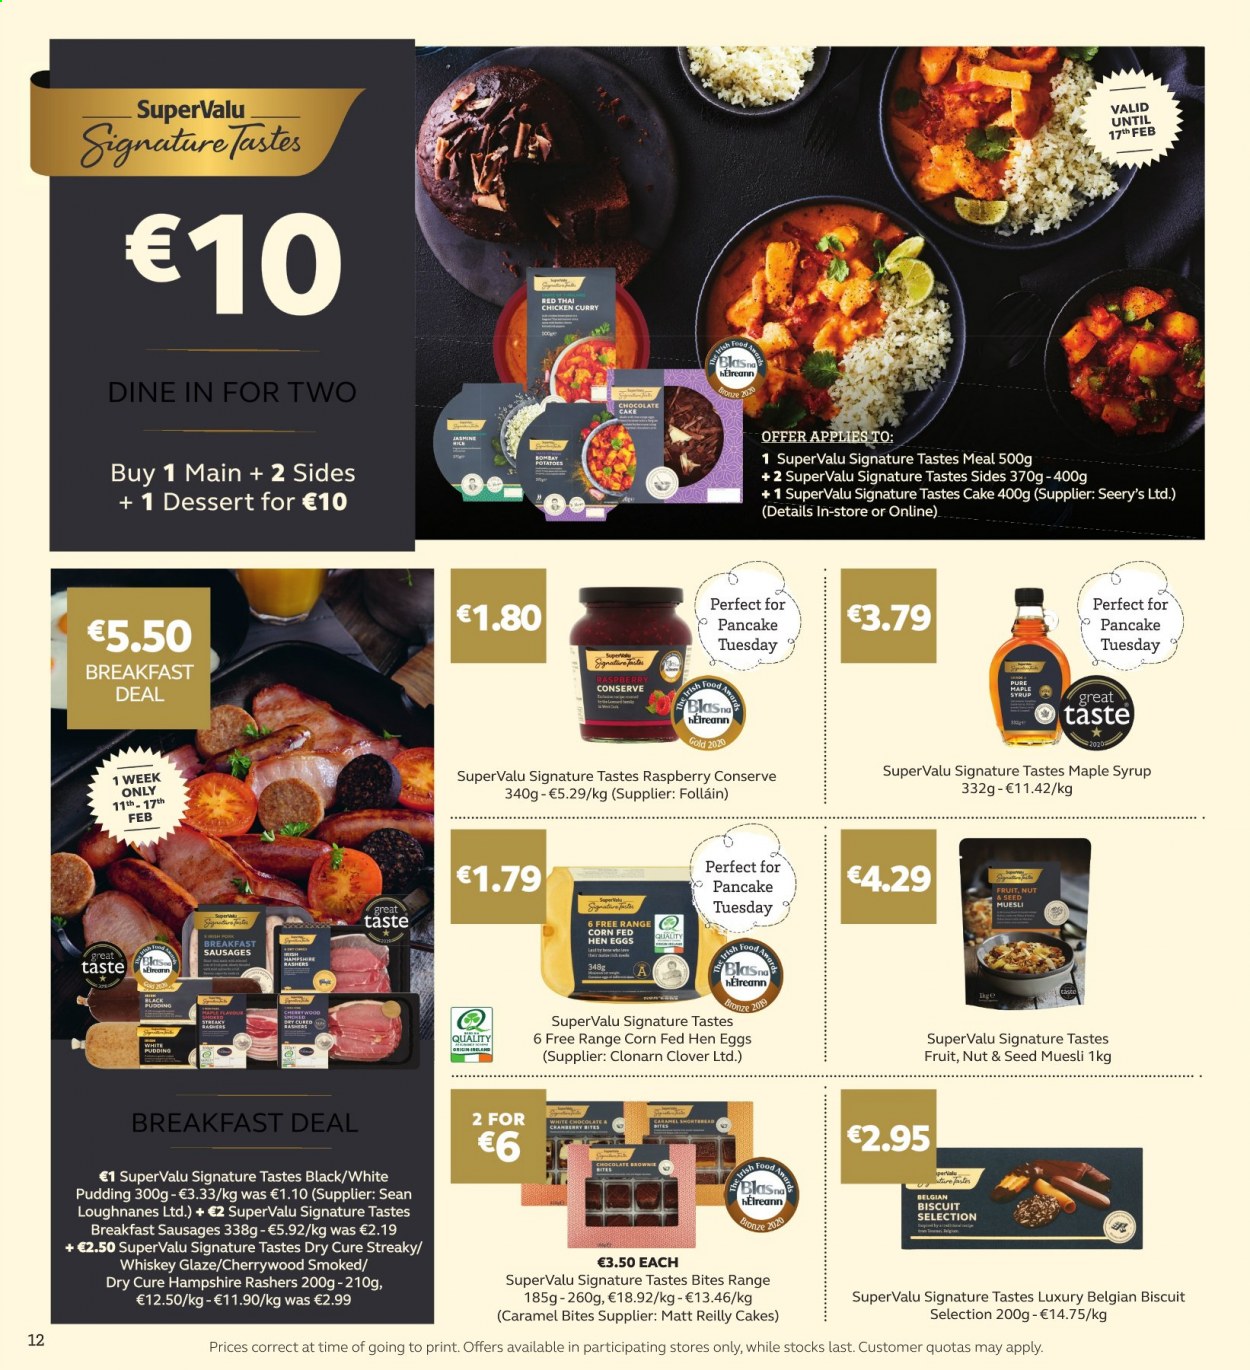 thumbnail - SuperValu offer  - 11.02.2021 - 24.02.2021 - Sales products - cake, sausage, pudding, Clover, eggs, biscuit, muesli, caramel, maple syrup, syrup. Page 12.